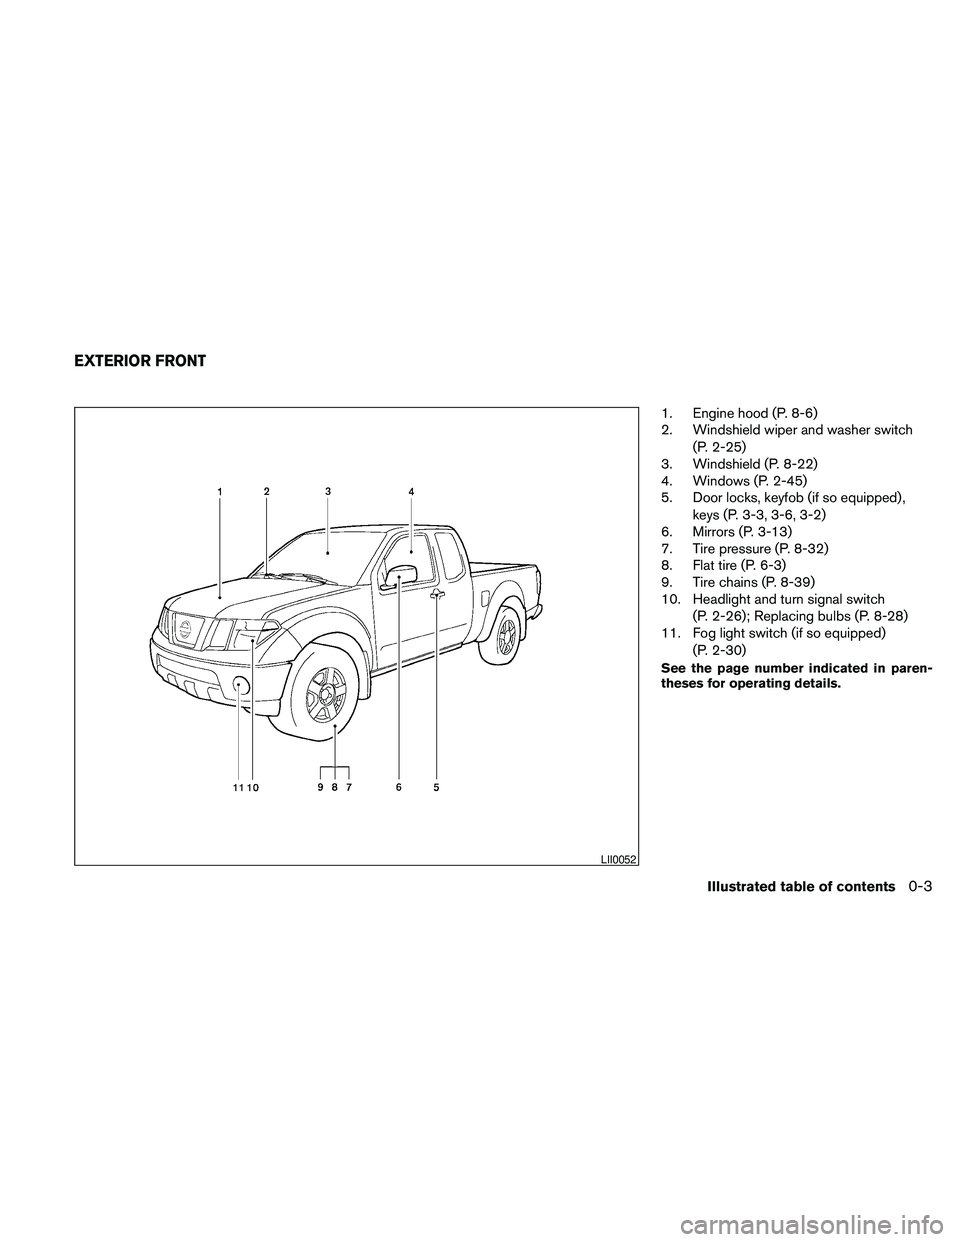 NISSAN FRONTIER 2010  Owner´s Manual 1. Engine hood (P. 8-6)
2. Windshield wiper and washer switch
(P. 2-25)
3. Windshield (P. 8-22)
4. Windows (P. 2-45)
5. Door locks, keyfob (if so equipped) ,
keys (P. 3-3, 3-6, 3-2)
6. Mirrors (P. 3-1